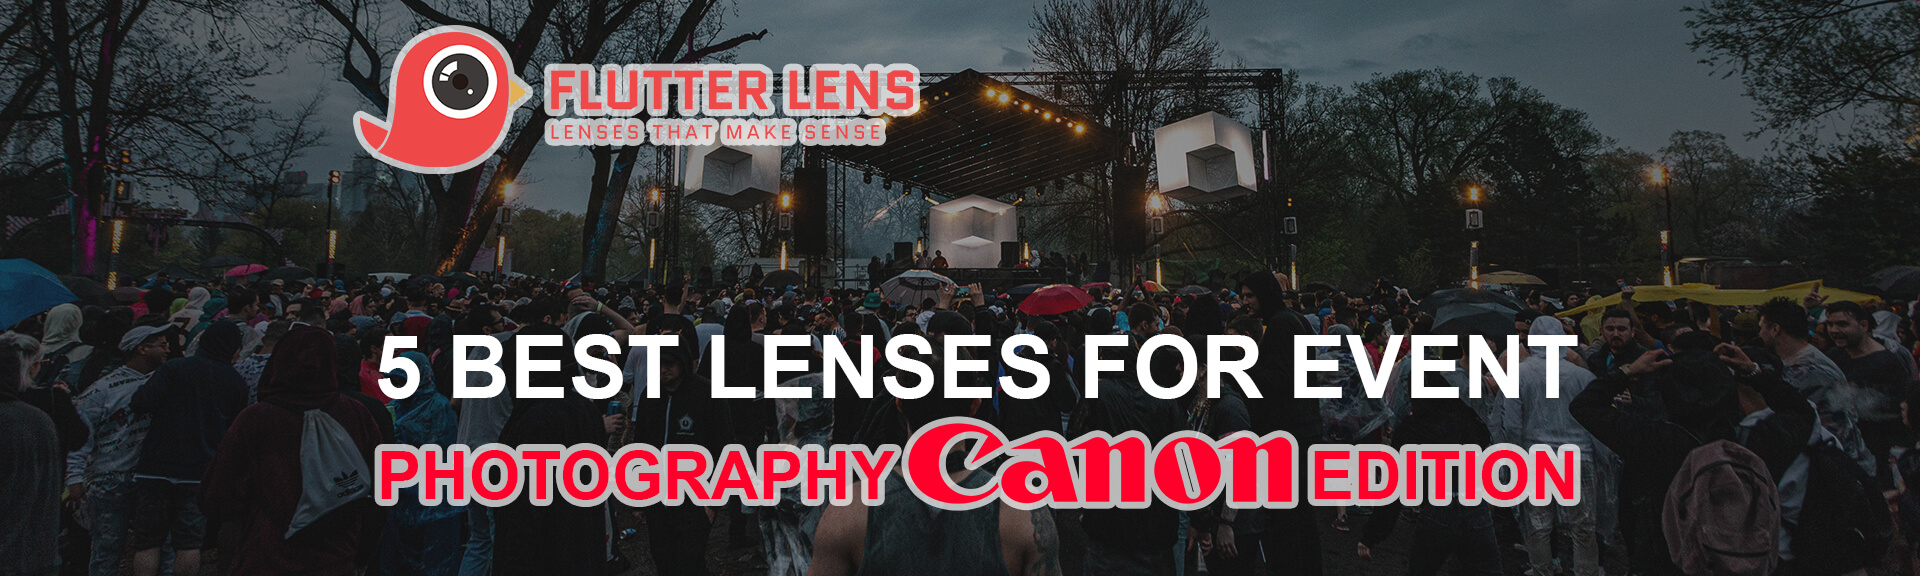 5 Best Lenses For Event Photography Canon Edition